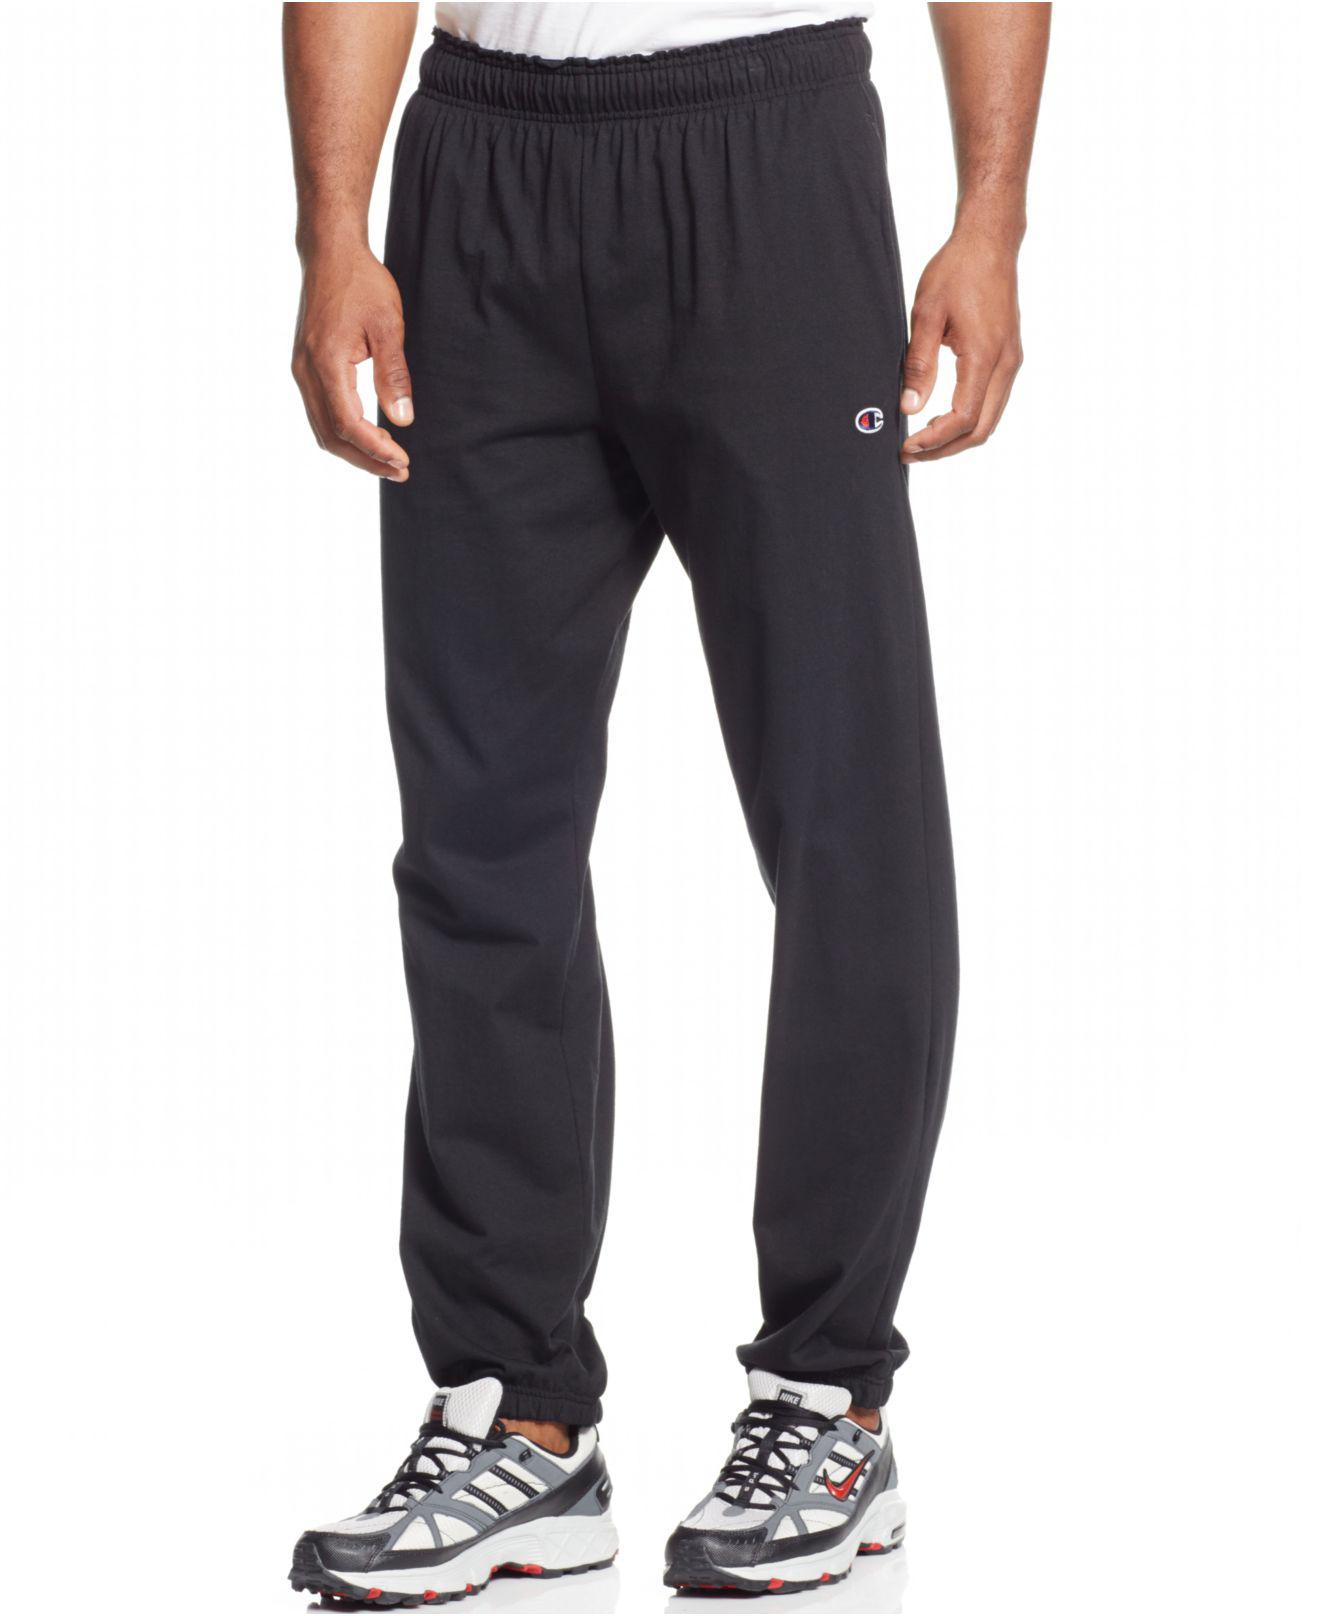 Champion Jersey Pants With Banded Bottom in Black for Men - Lyst